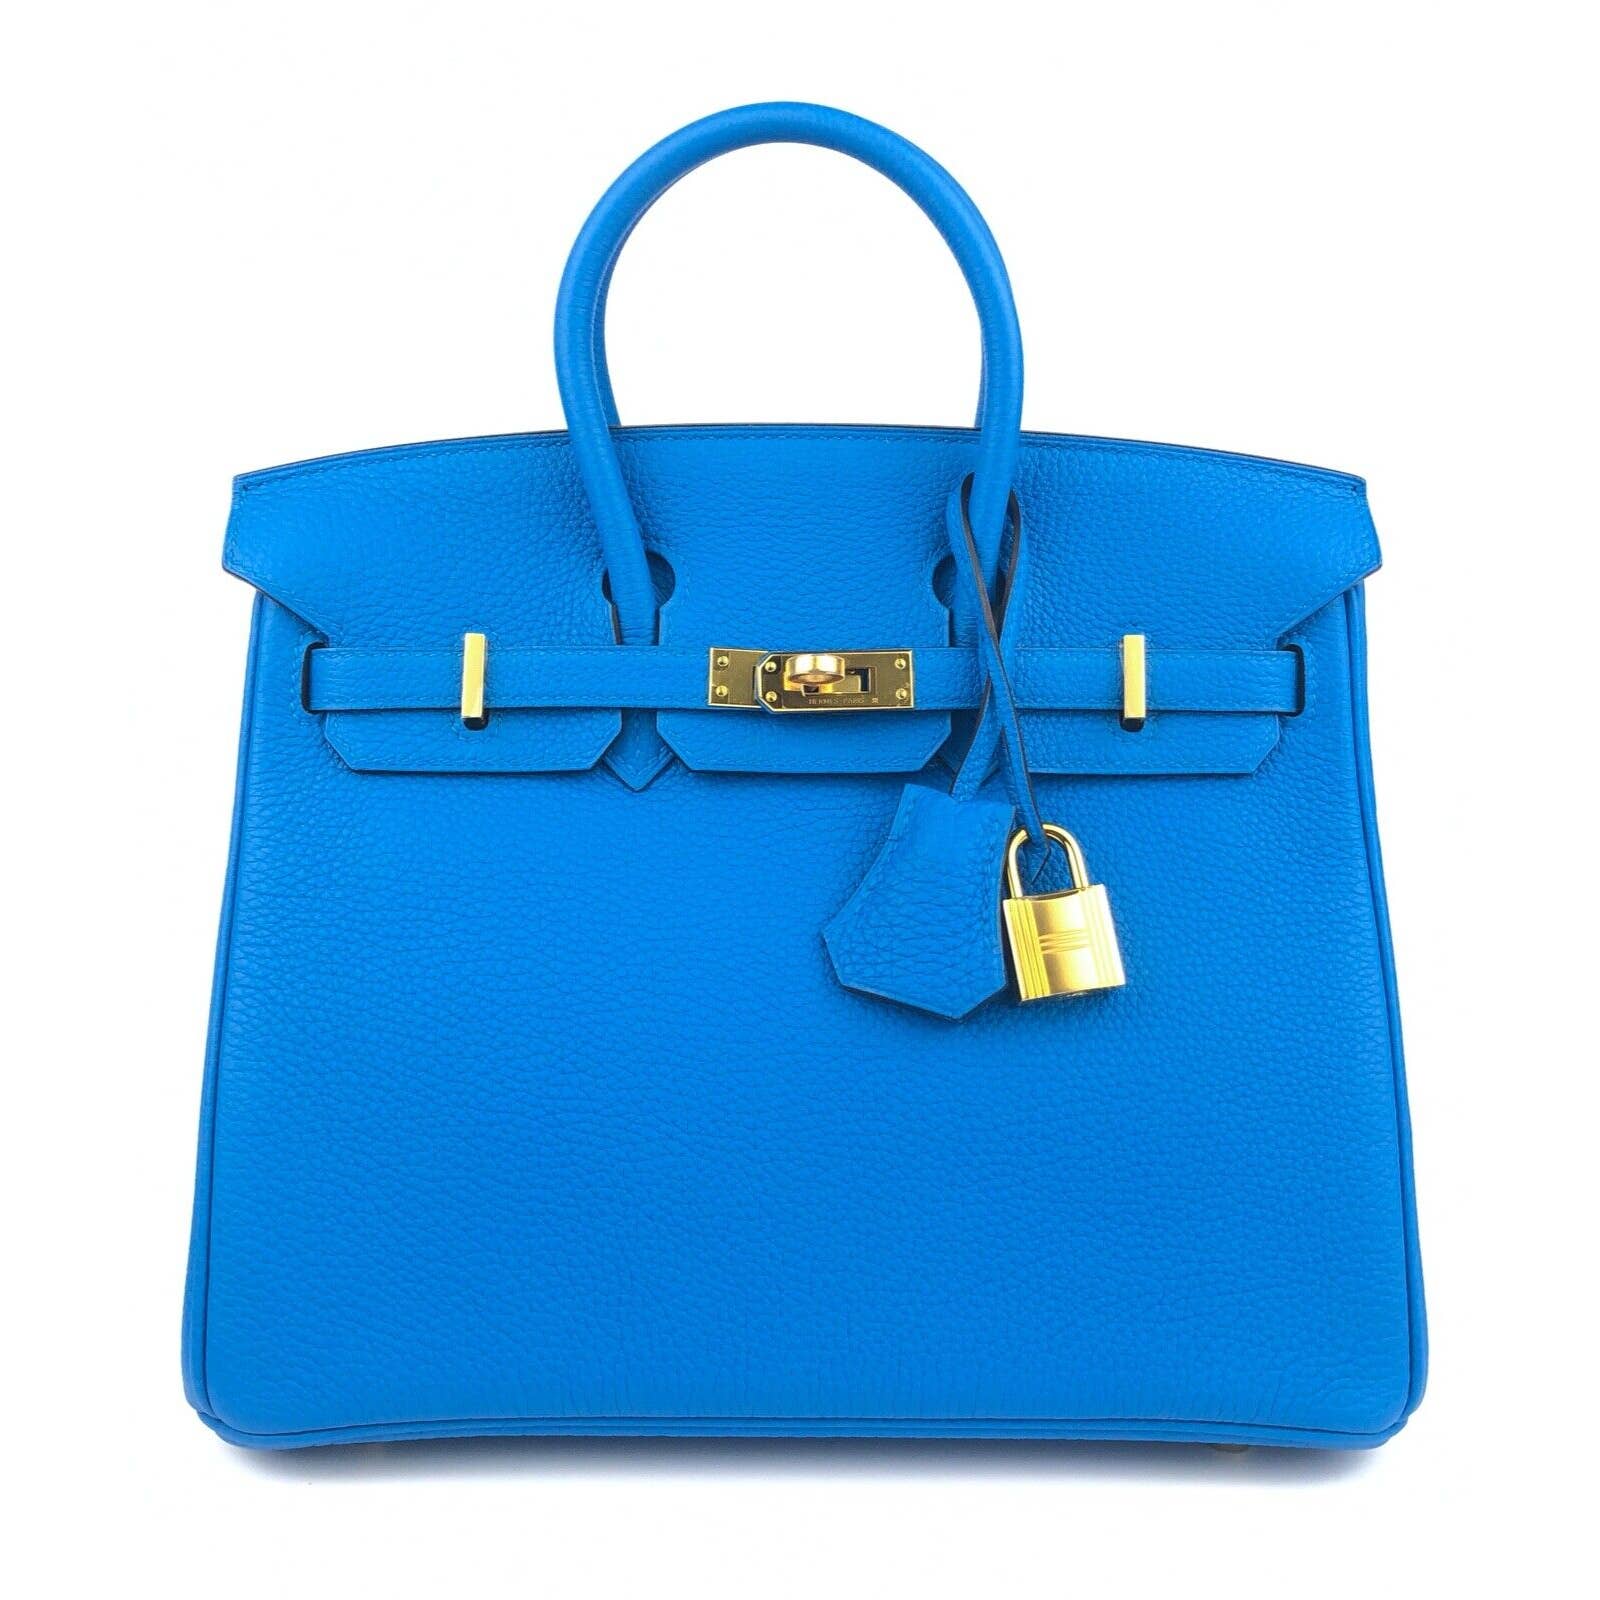 Hermes Birkin Blue Atoll Togo with Gold